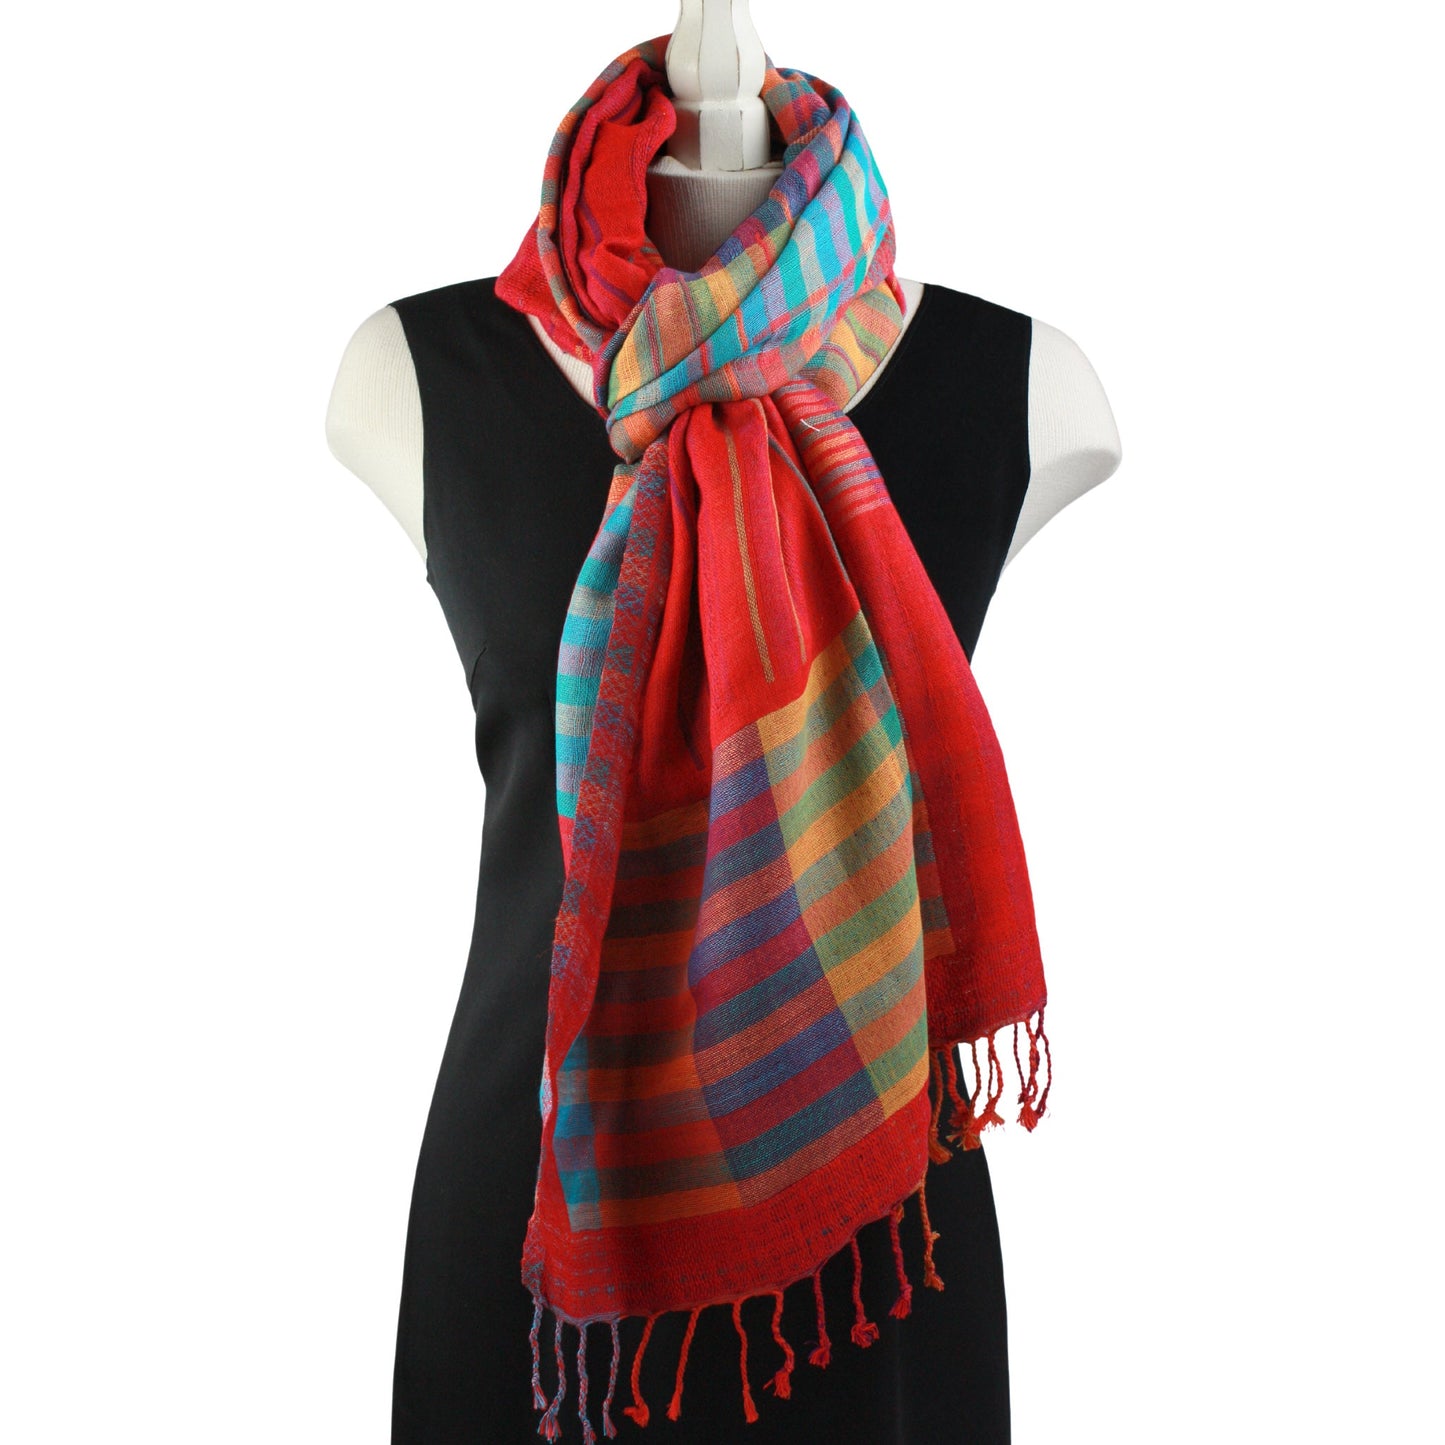 Kalya scarf in red, turquoise, purple and yellow